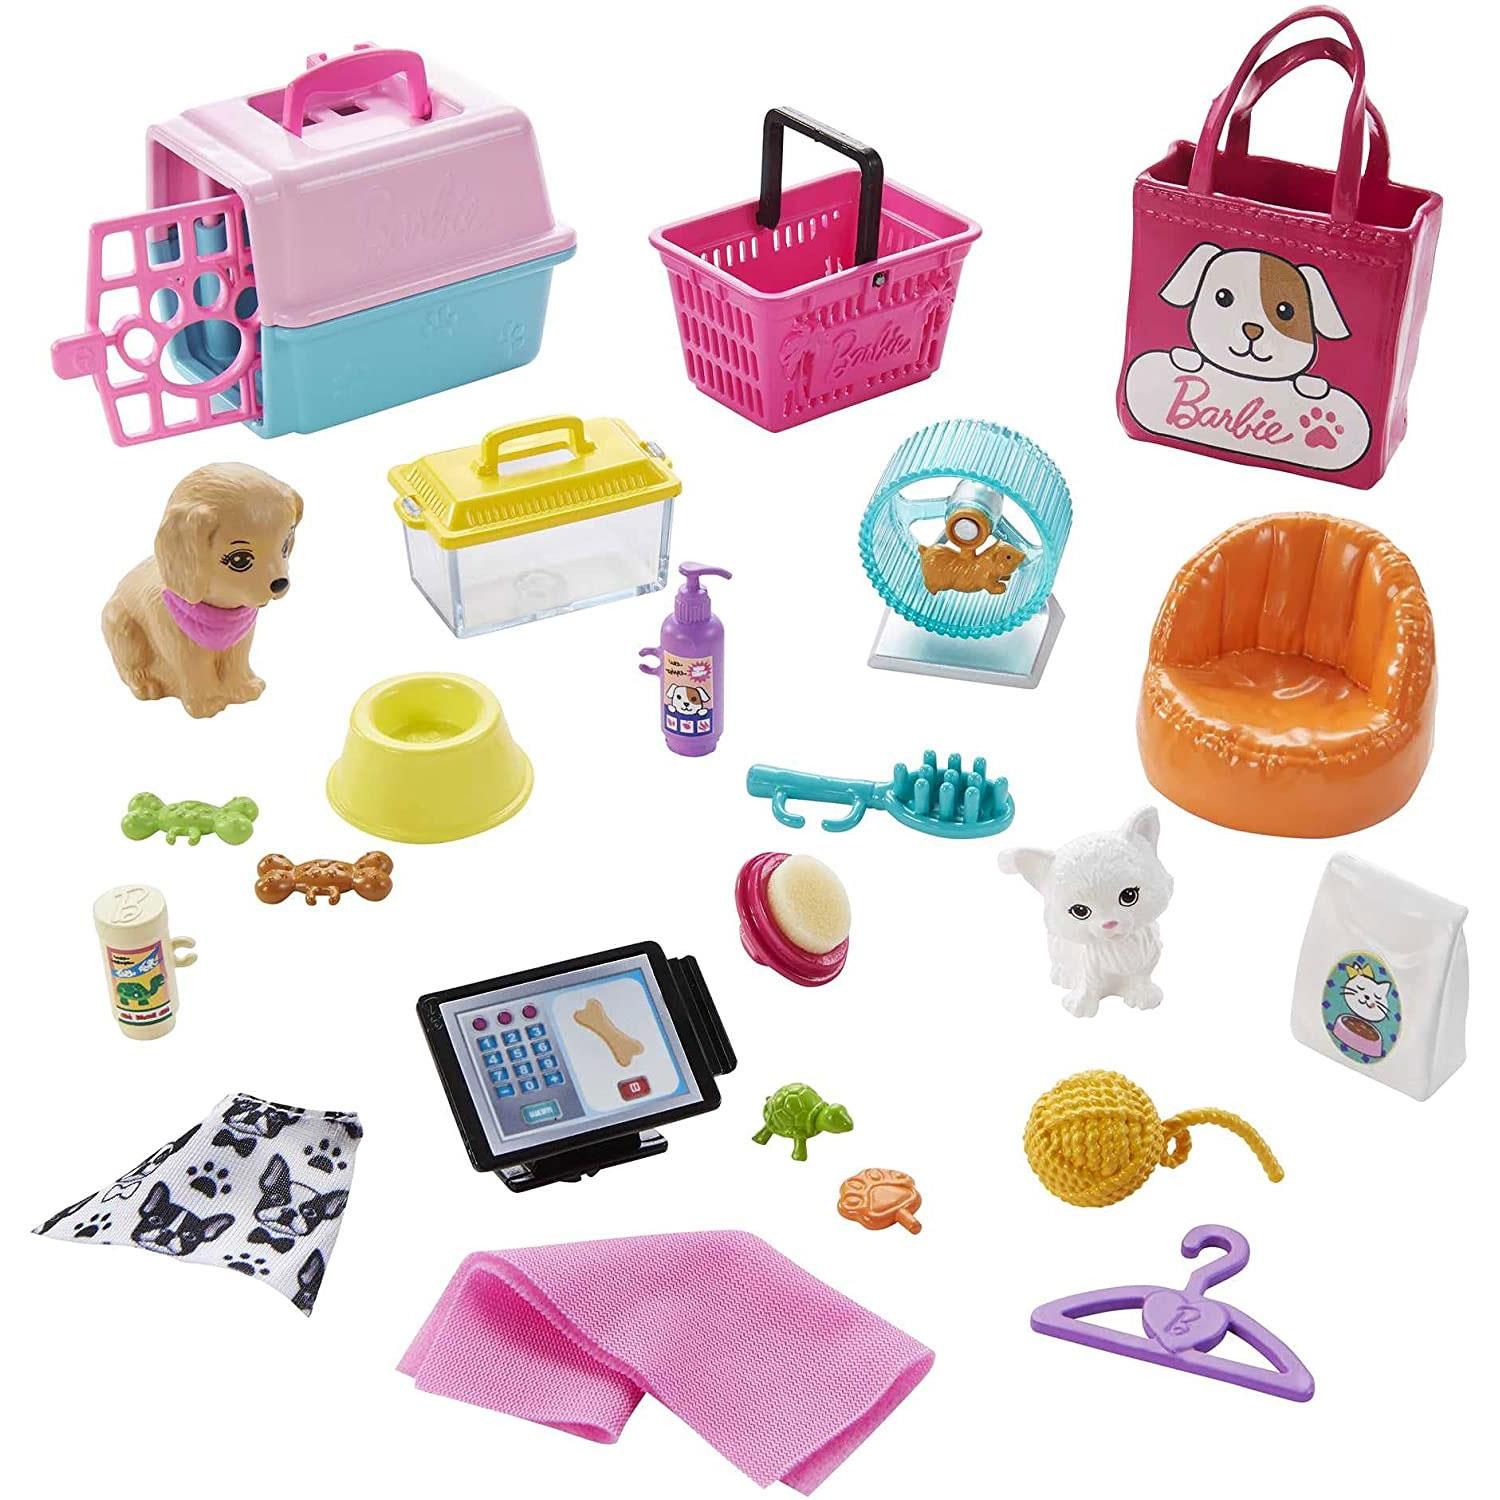 Barbie Pet Supply Store Playset with Doll and Accessories

Welcome to the Barbie pet boutique playset, where kids will find everything they need to help Barbie doll care for her animal friends! This playset inspires nurturing play and friendship stories with a grooming station, checkout counter, shelving unit and over 20 themed play pieces. To help Barbie doll groom her puppy, flip the counter up to reveal a grooming station. Dip the included sponge in warm water and help the puppy wash up, then watch his muddy spots vanish! After they've cleaned up, Barbie dolls can shop for treats and toys or adopt a new pal. With four pets, fun features and so many accessories, this Barbie pet store playset inspires endless storytelling for 3 to 7-year-olds. Doll cannot stand alone. Colours and decorations may vary.

Features:

The Barbie pet boutique playset is an animal lover's dream with 4 pets, a grooming station, a checkout counter and over 20 themed play pieces.
The playset can transform in seconds -flip the counter up to reveal a sink where a Barbie doll can groom her puppy.
To activate the puppy's colour-change feature, dip the included sponge in warm water and 